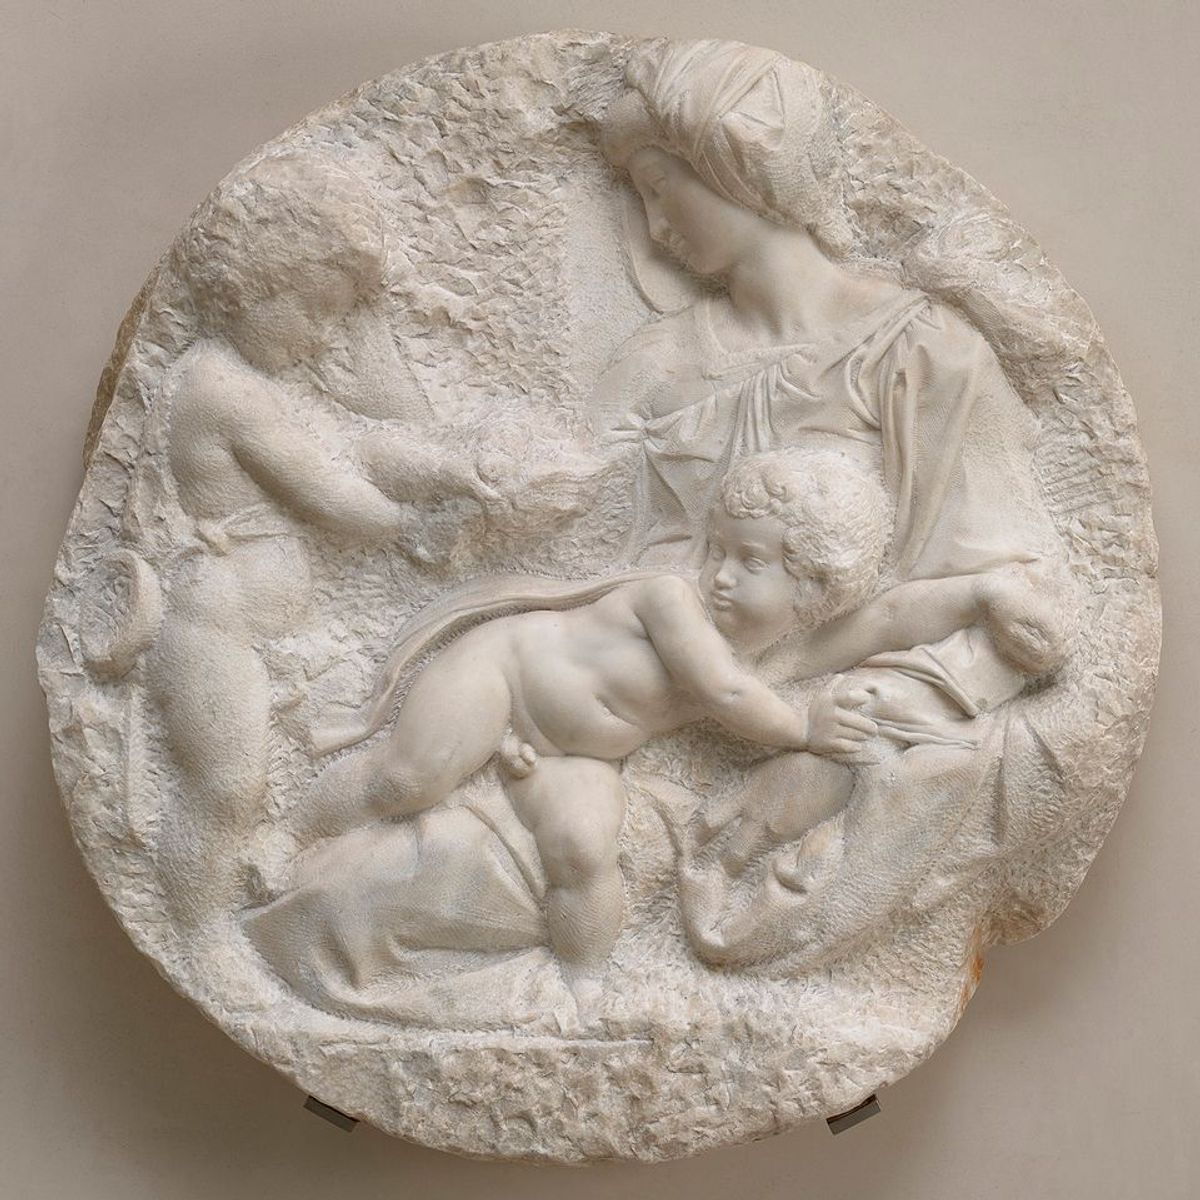 Michelangelo's The Virgin and Child with the Infant St John (around 1504-05), Royal Academy of Arts, London Photo: Prudence Cuming Associates Limited